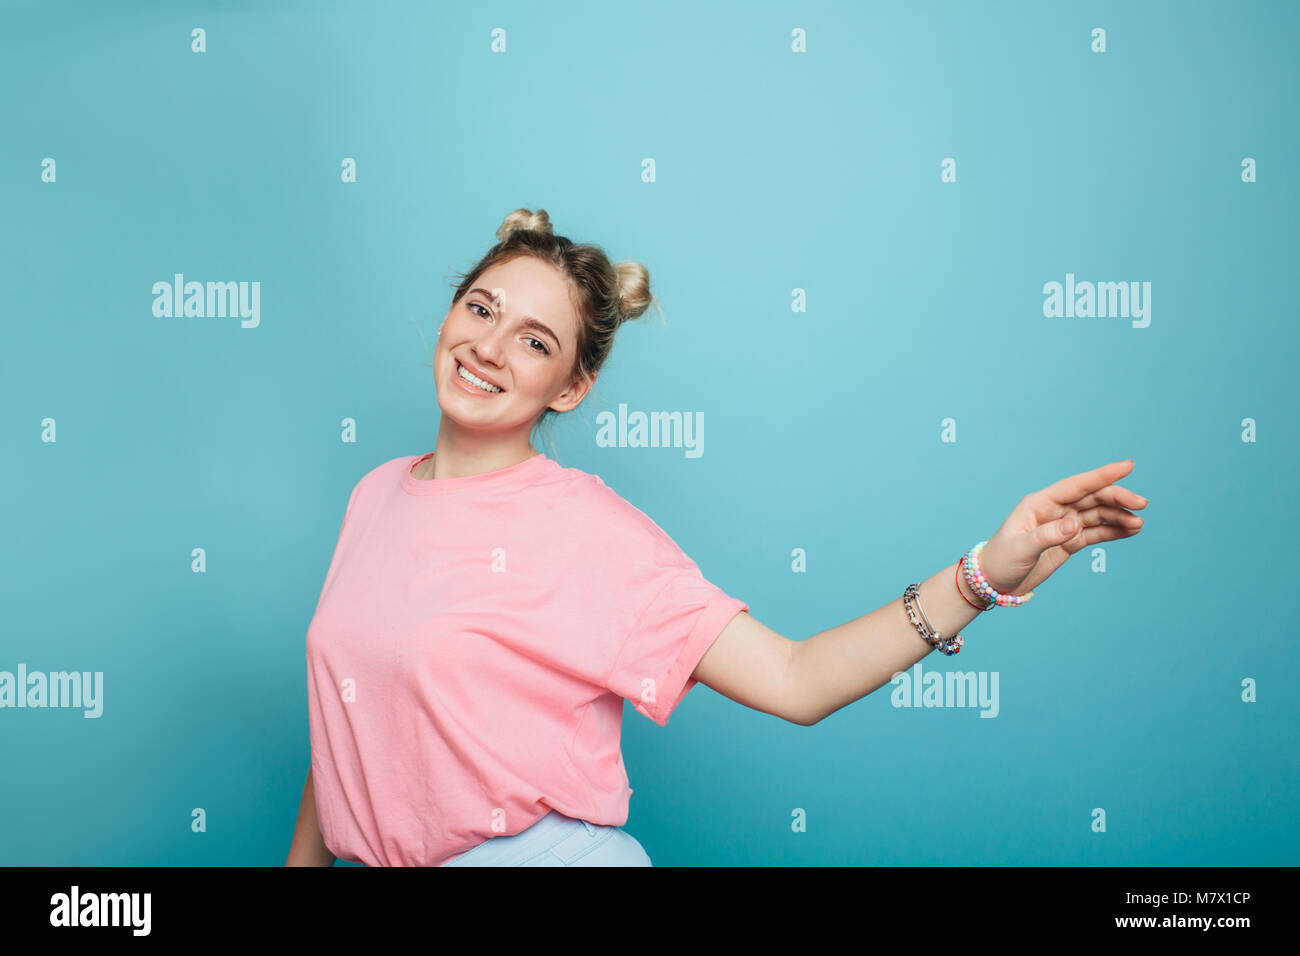 modern young woman with double buns hair waving hand on a blue pastel background Stock Photo